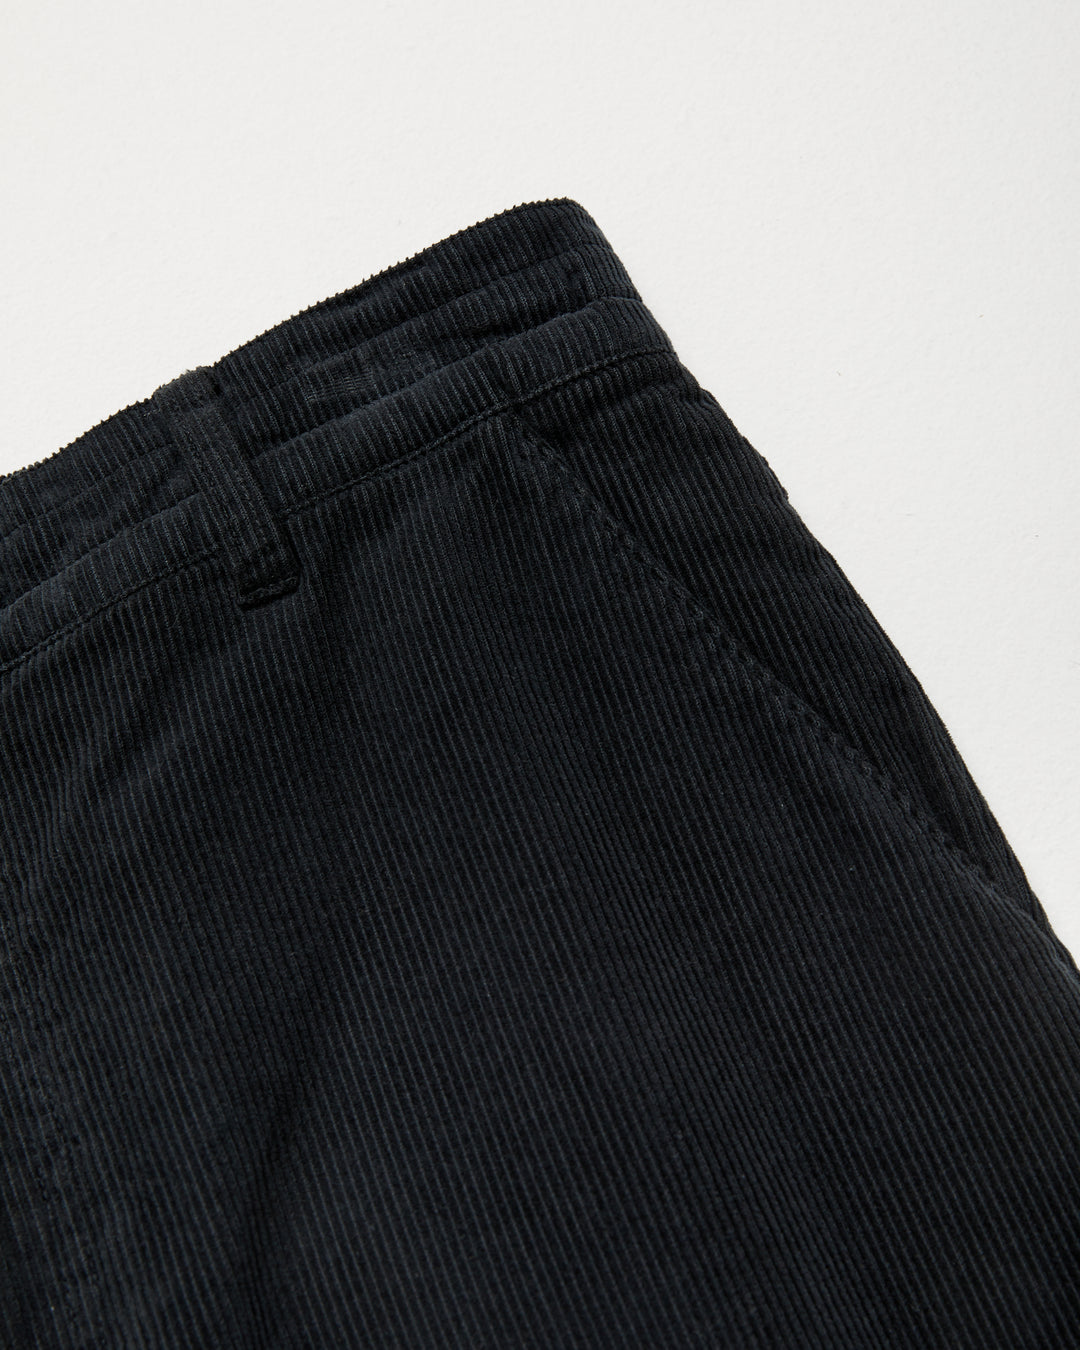 Mr Simple - Tanner Corduroy Pant in Charcoal | Buster McGee Daylesford